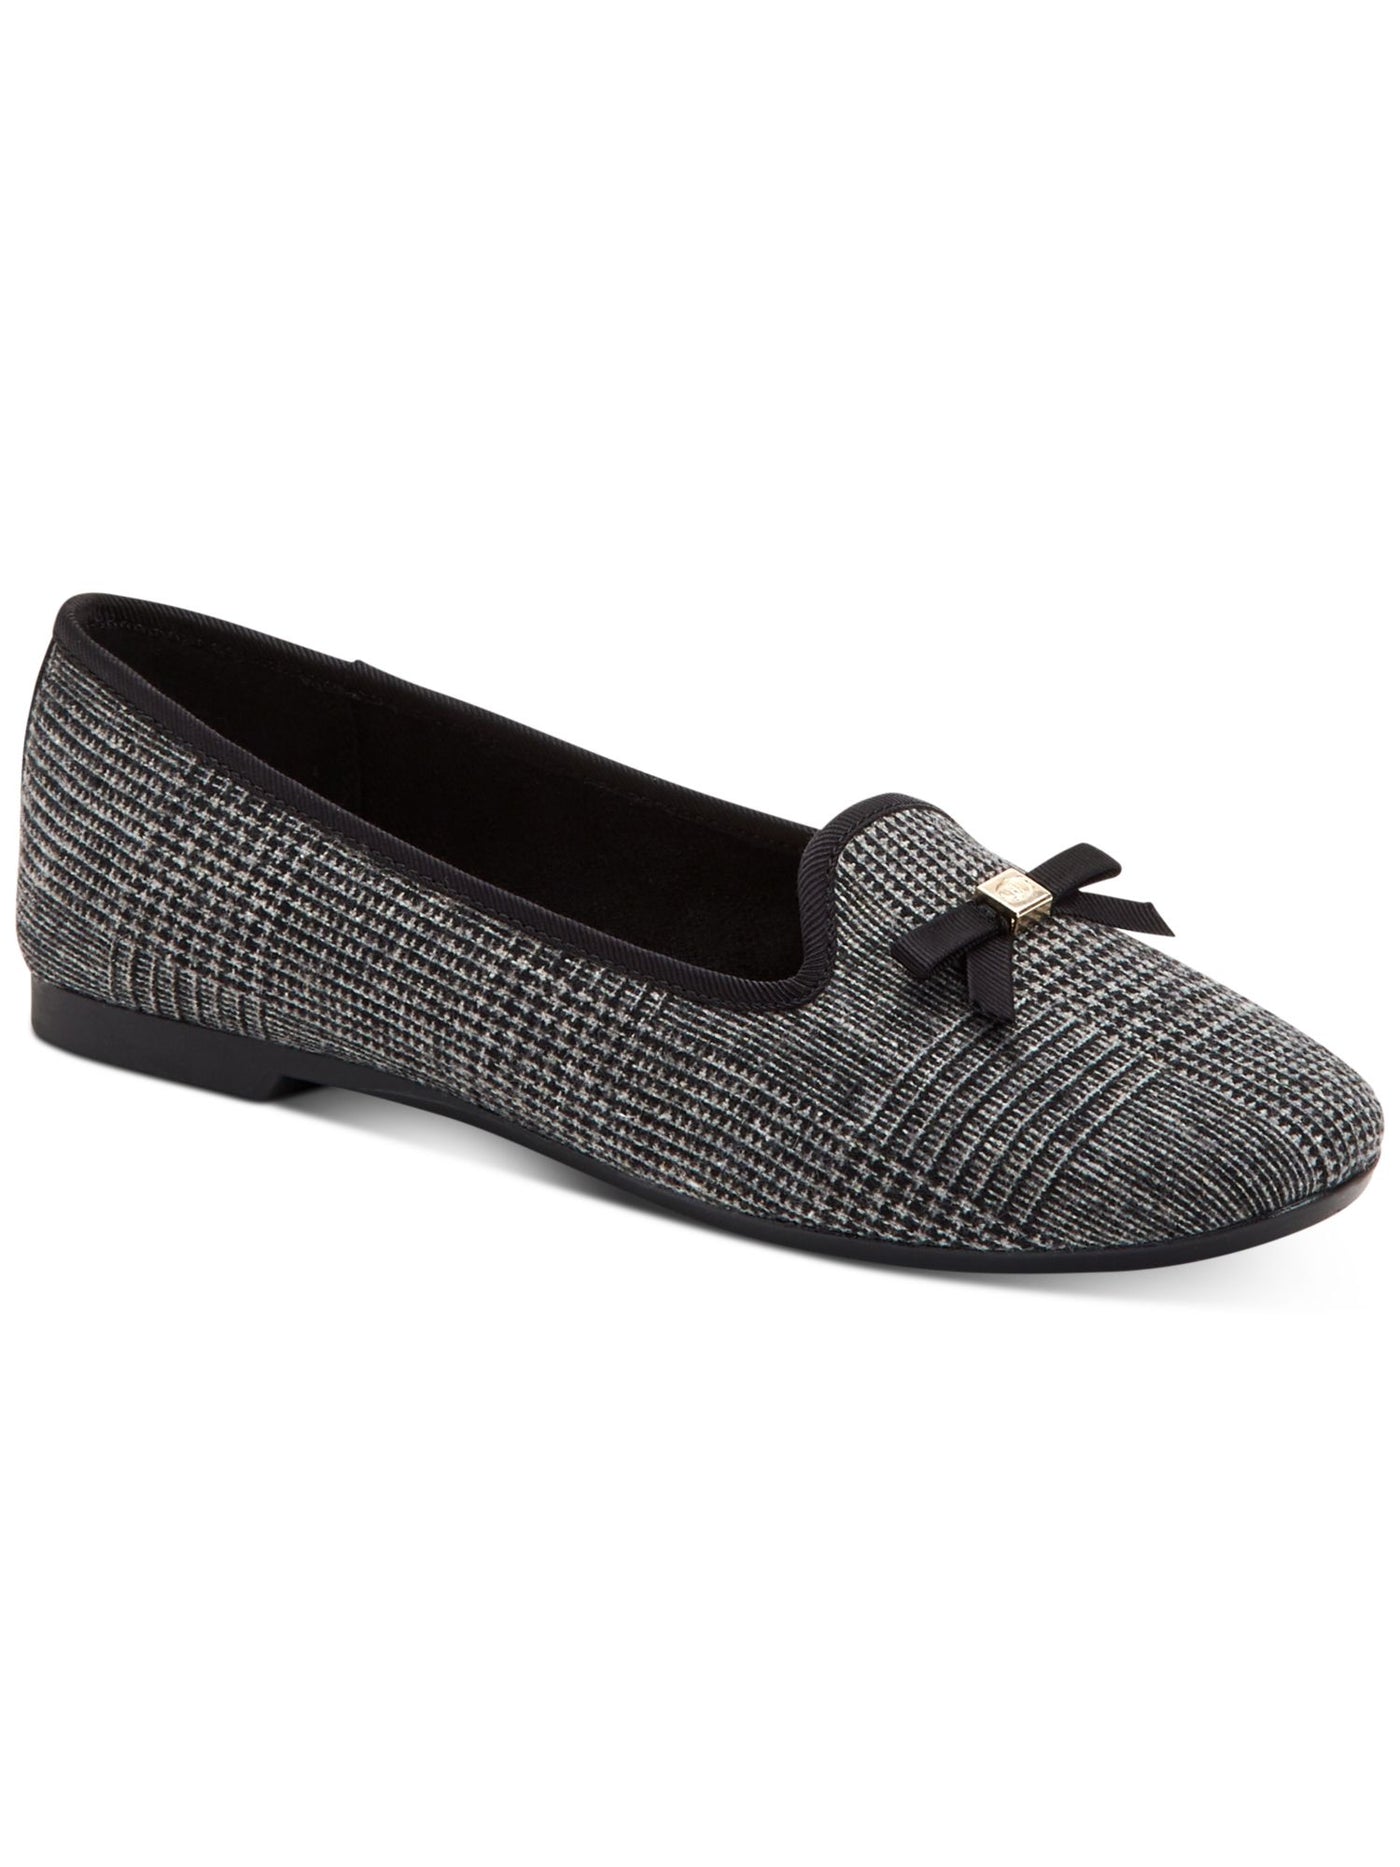 CHARTER CLUB Womens Gray Patterned Metallic Accent Bow Accent Padded Kimii Round Toe Slip On Loafers Shoes 12 M